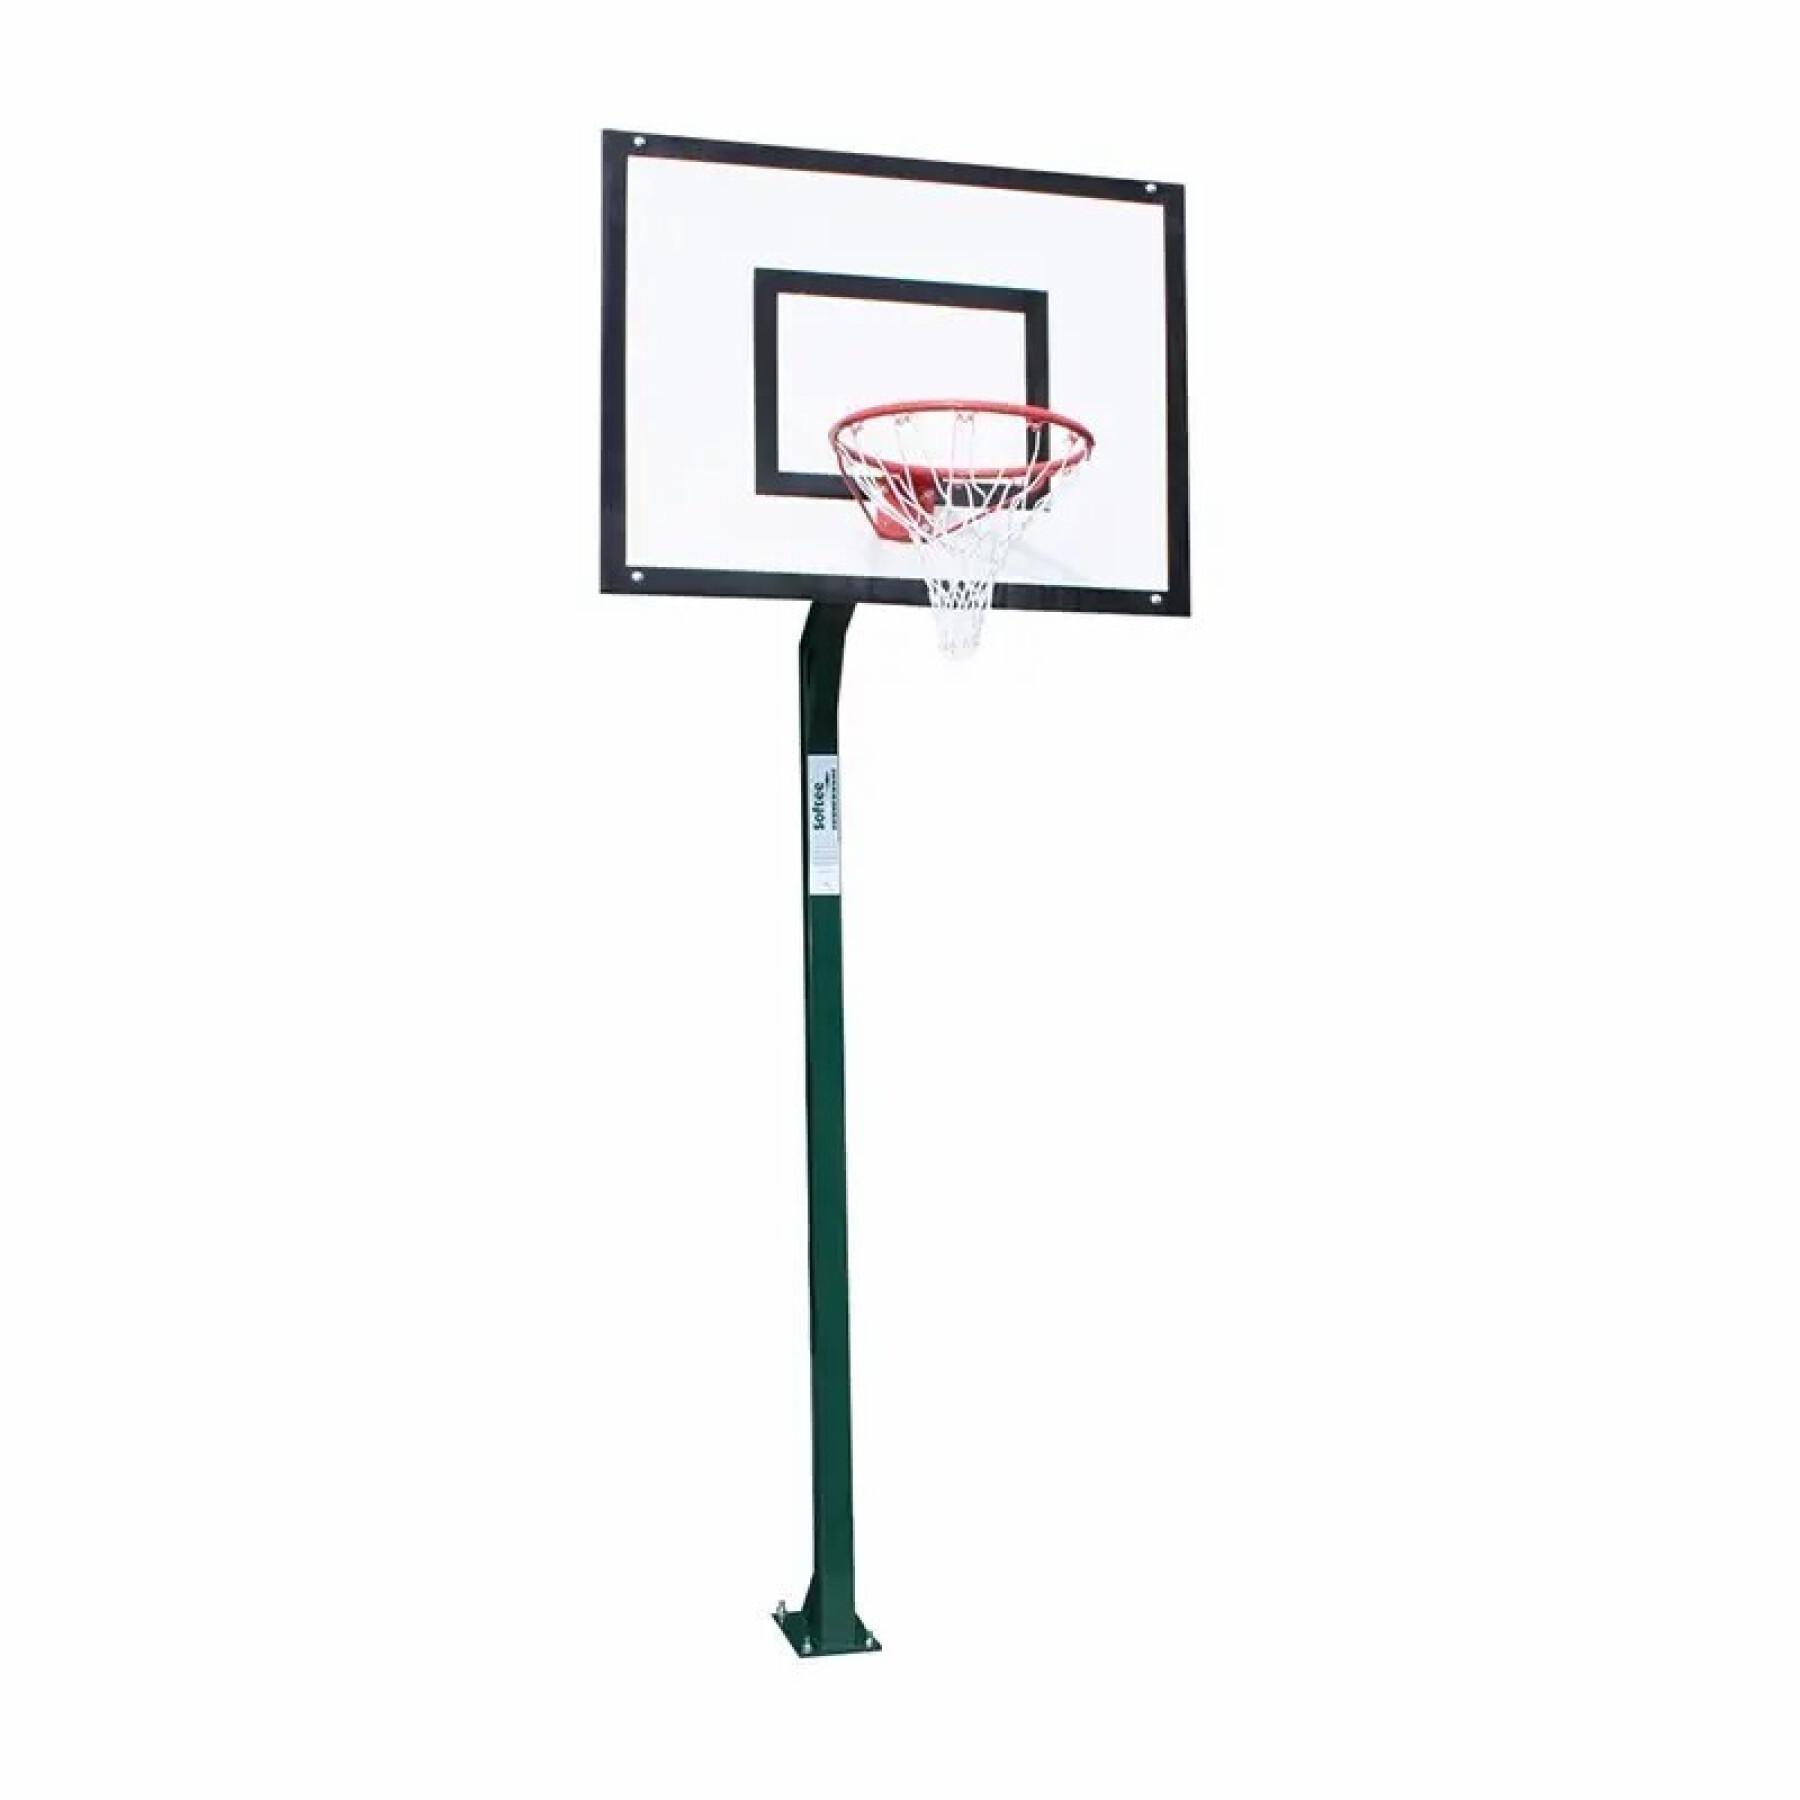 Set of 2 minibasket baskets without board or hoop with base for anchoring Softee Equipment Monotubular Fija